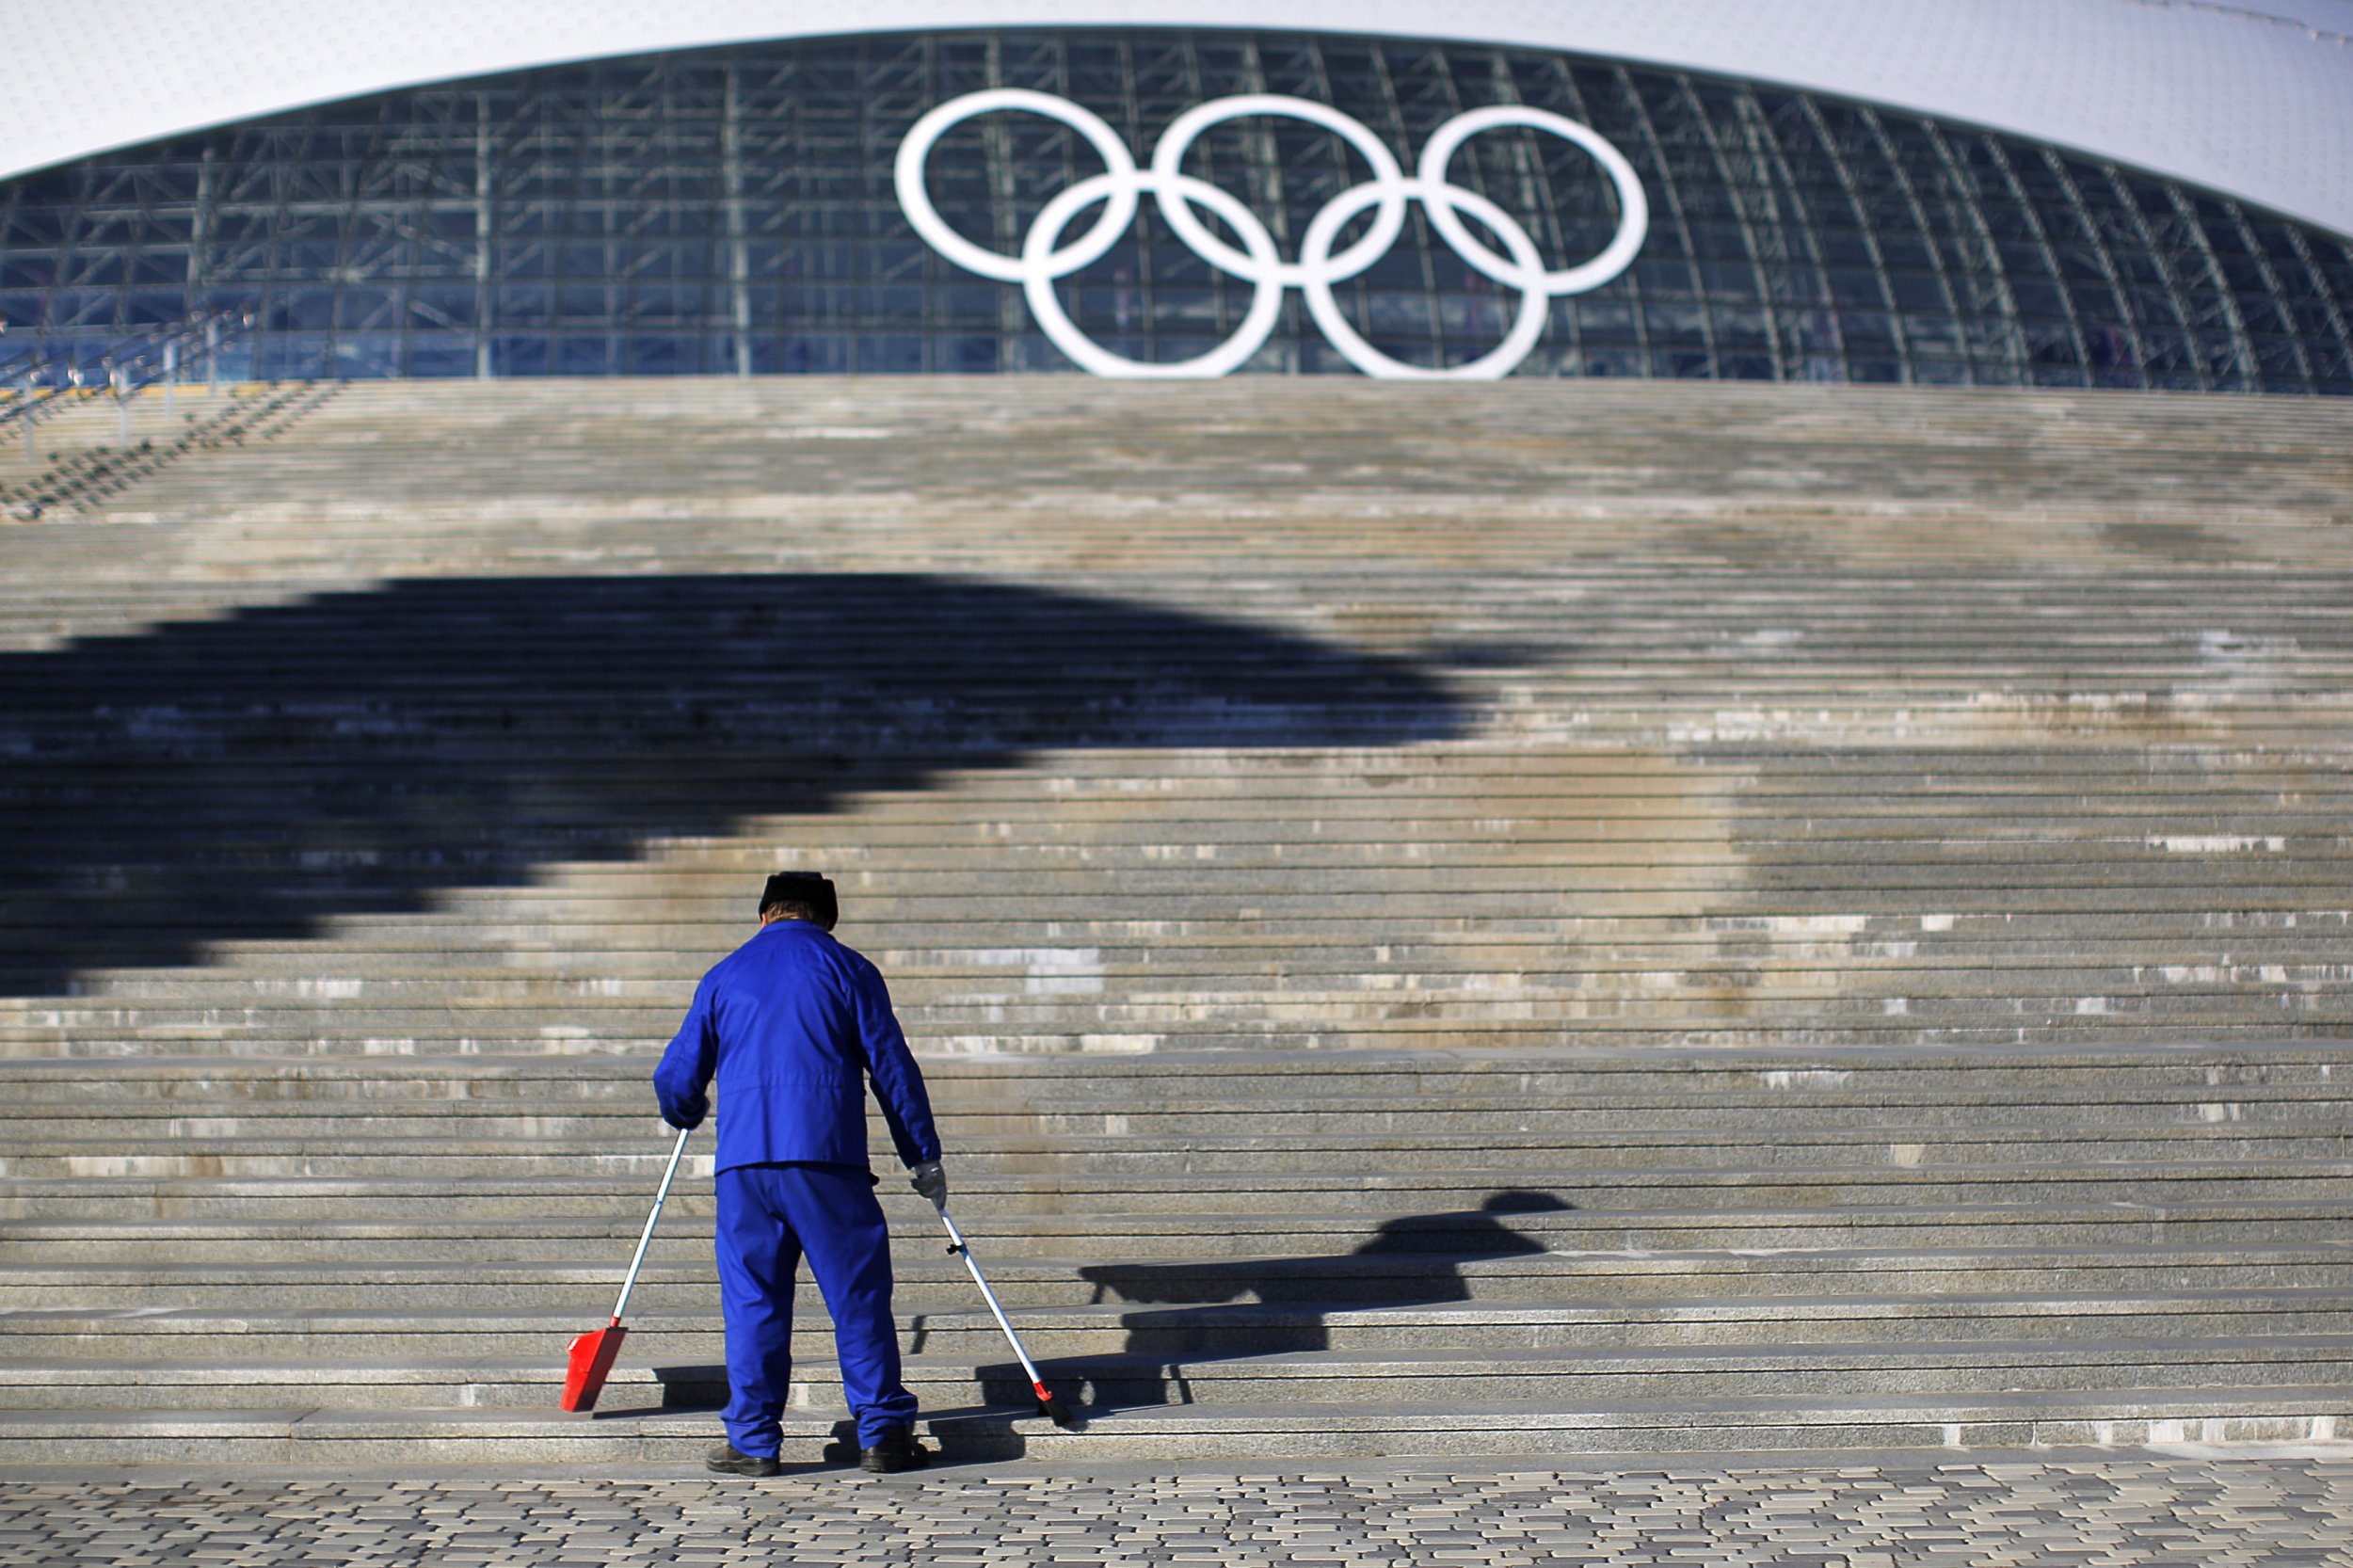 Sochi Olympic Stairs